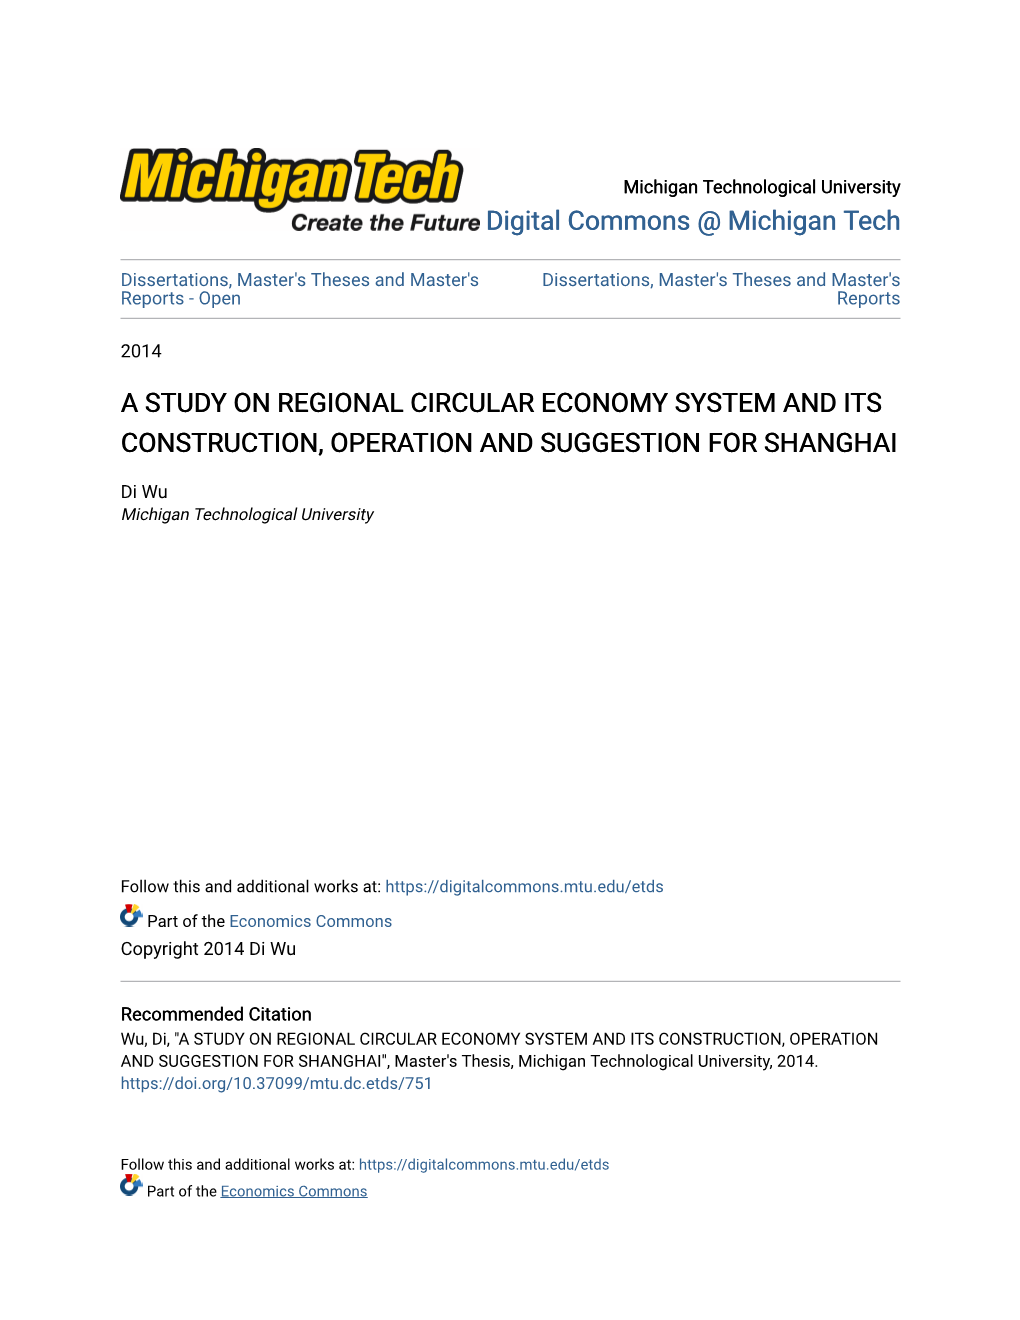 A Study on Regional Circular Economy System and Its Construction, Operation and Suggestion for Shanghai